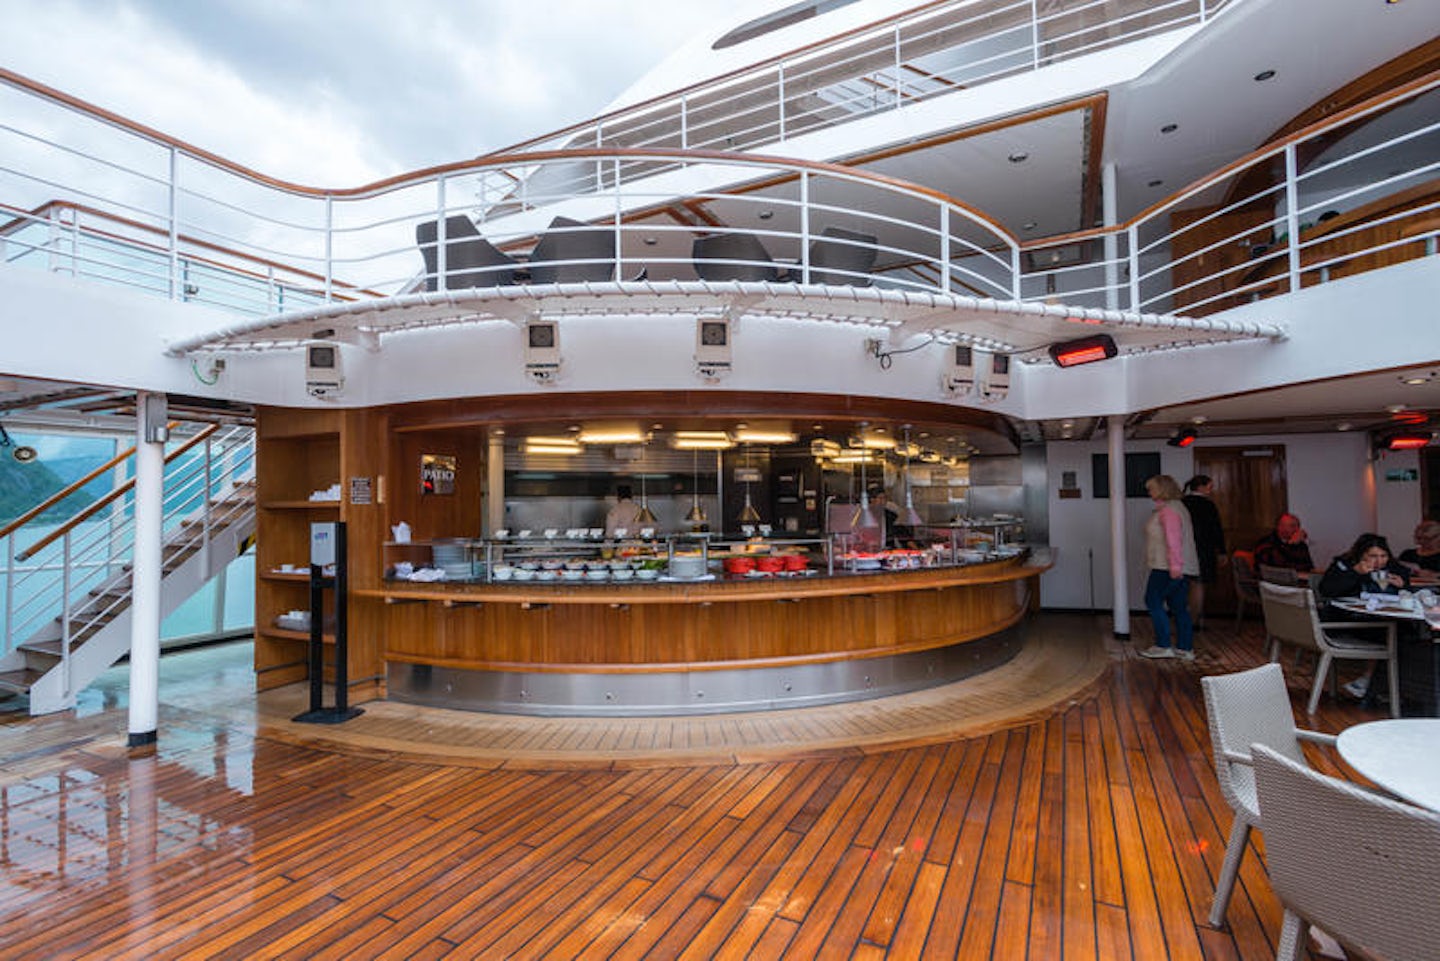 The Patio Grill on Seabourn Quest